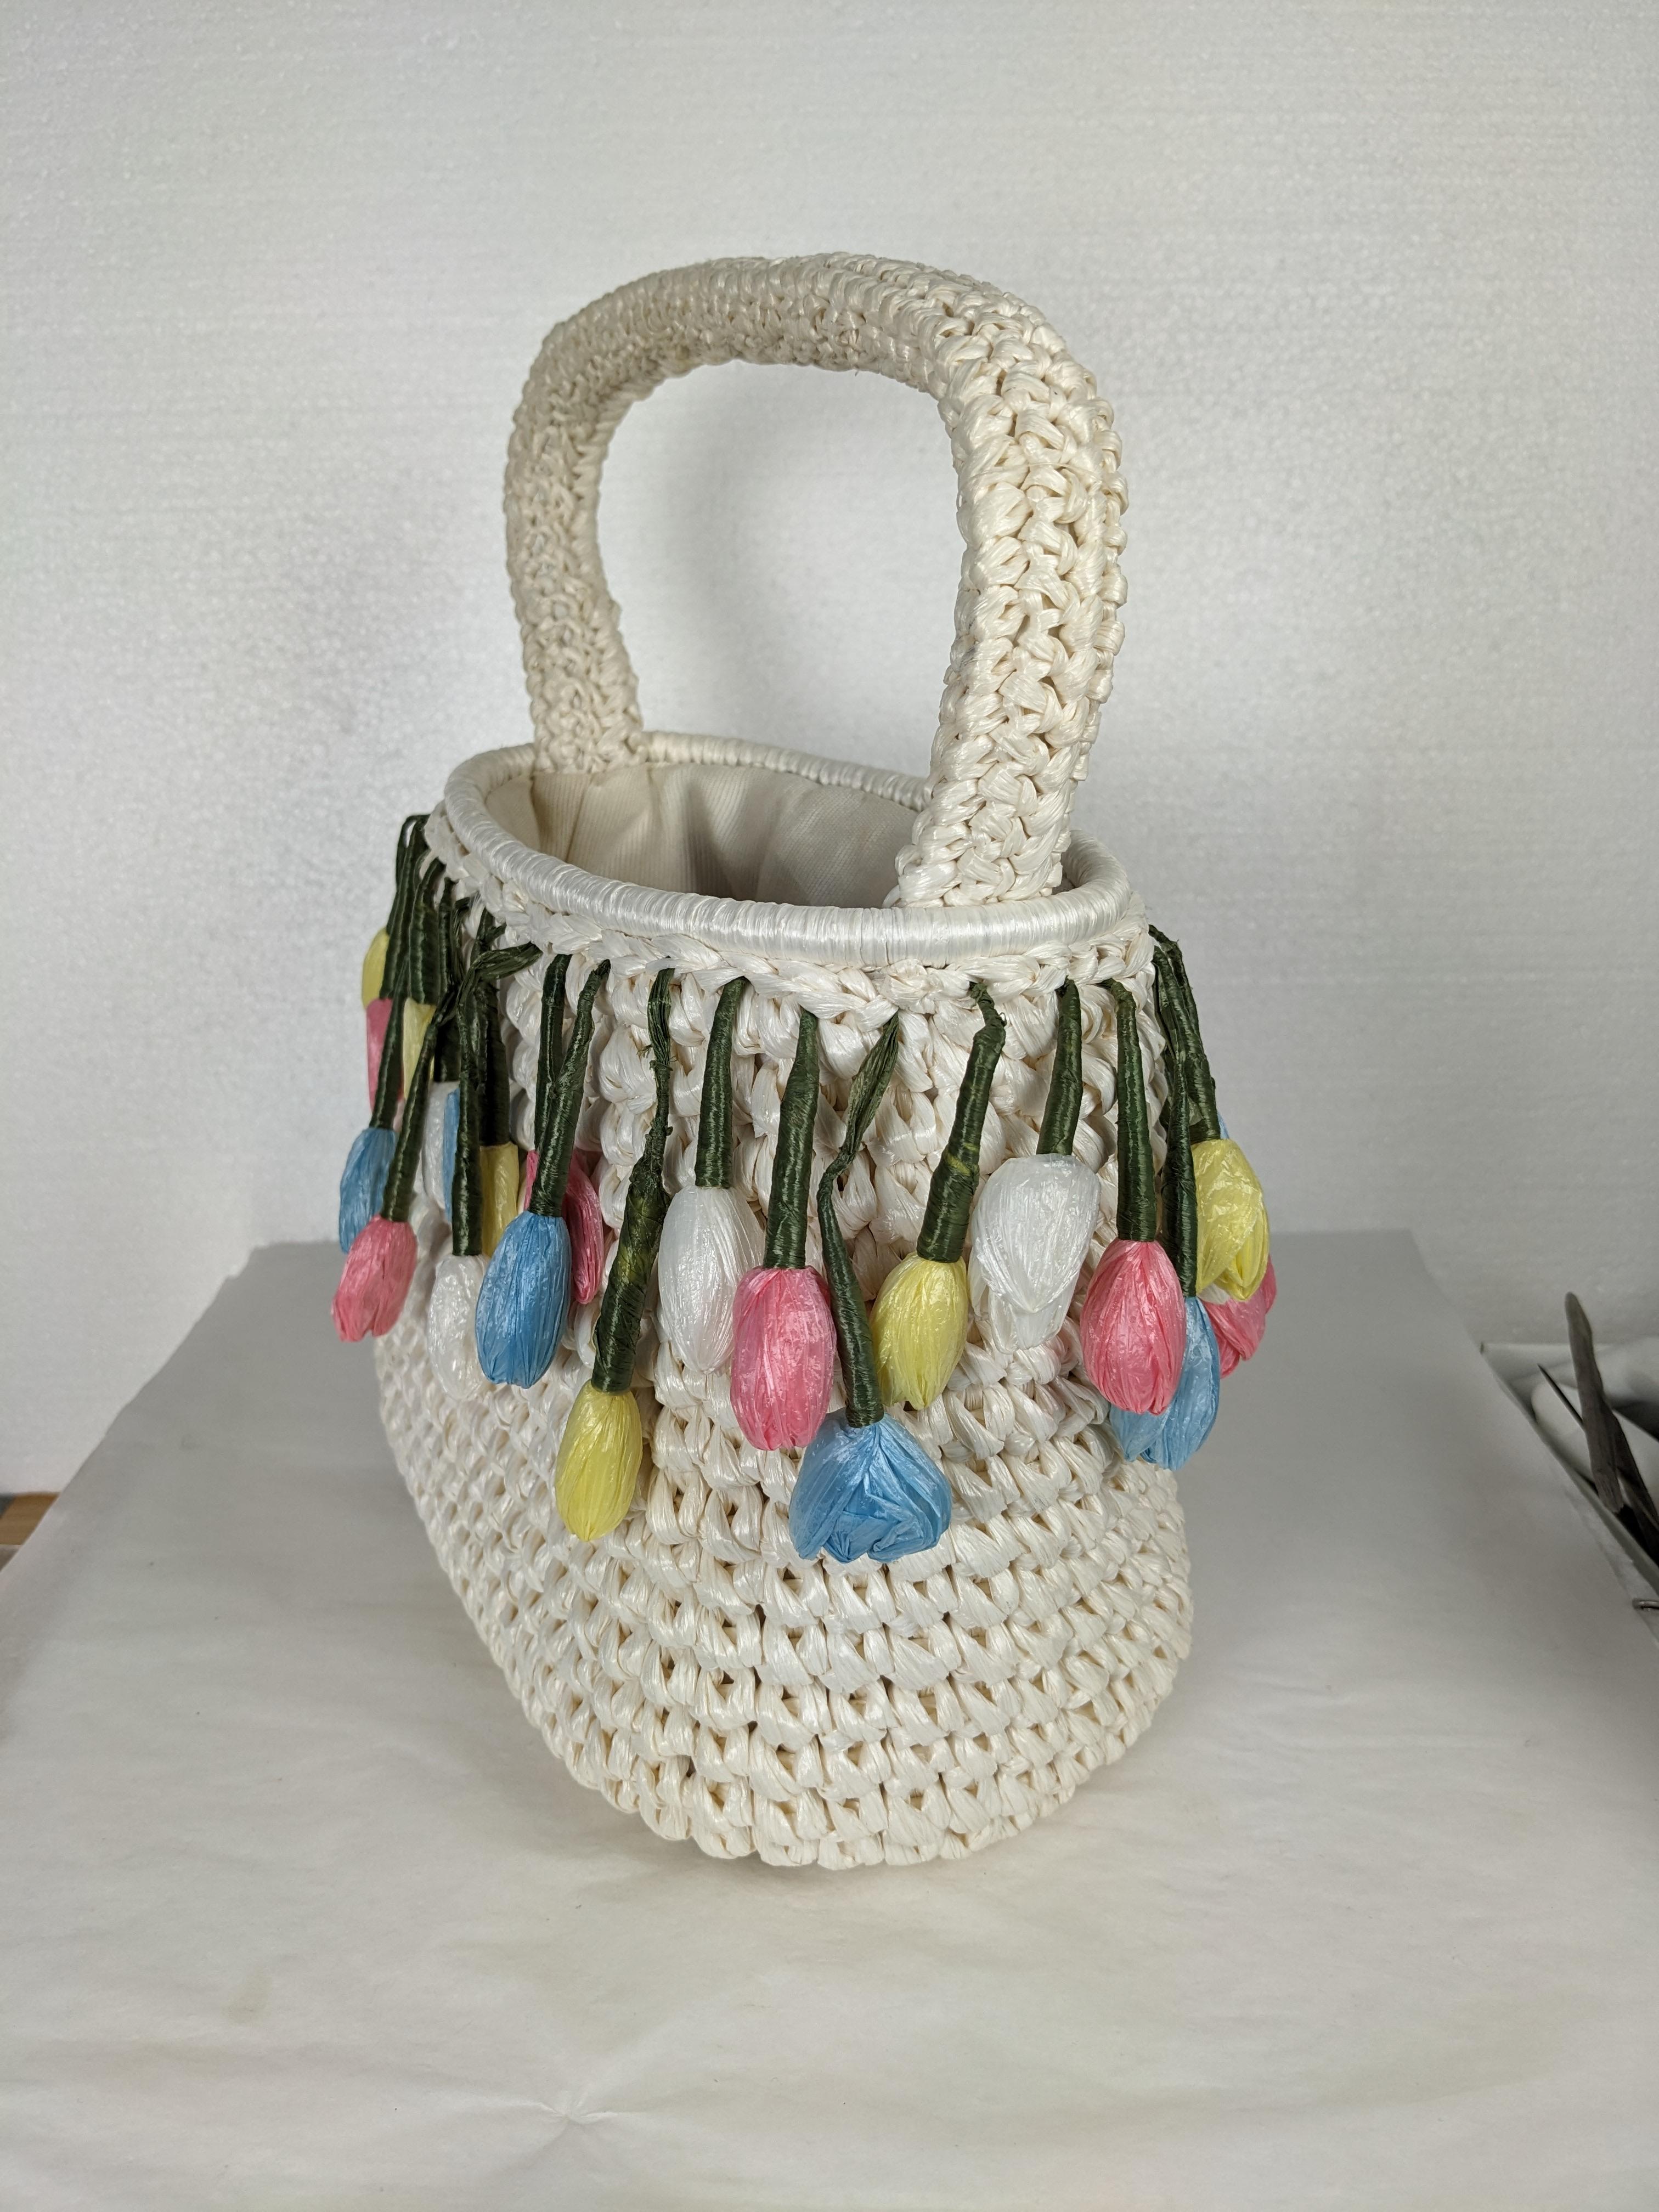 Charming Raffia and Straw Flower Bud Purse In Good Condition For Sale In New York, NY